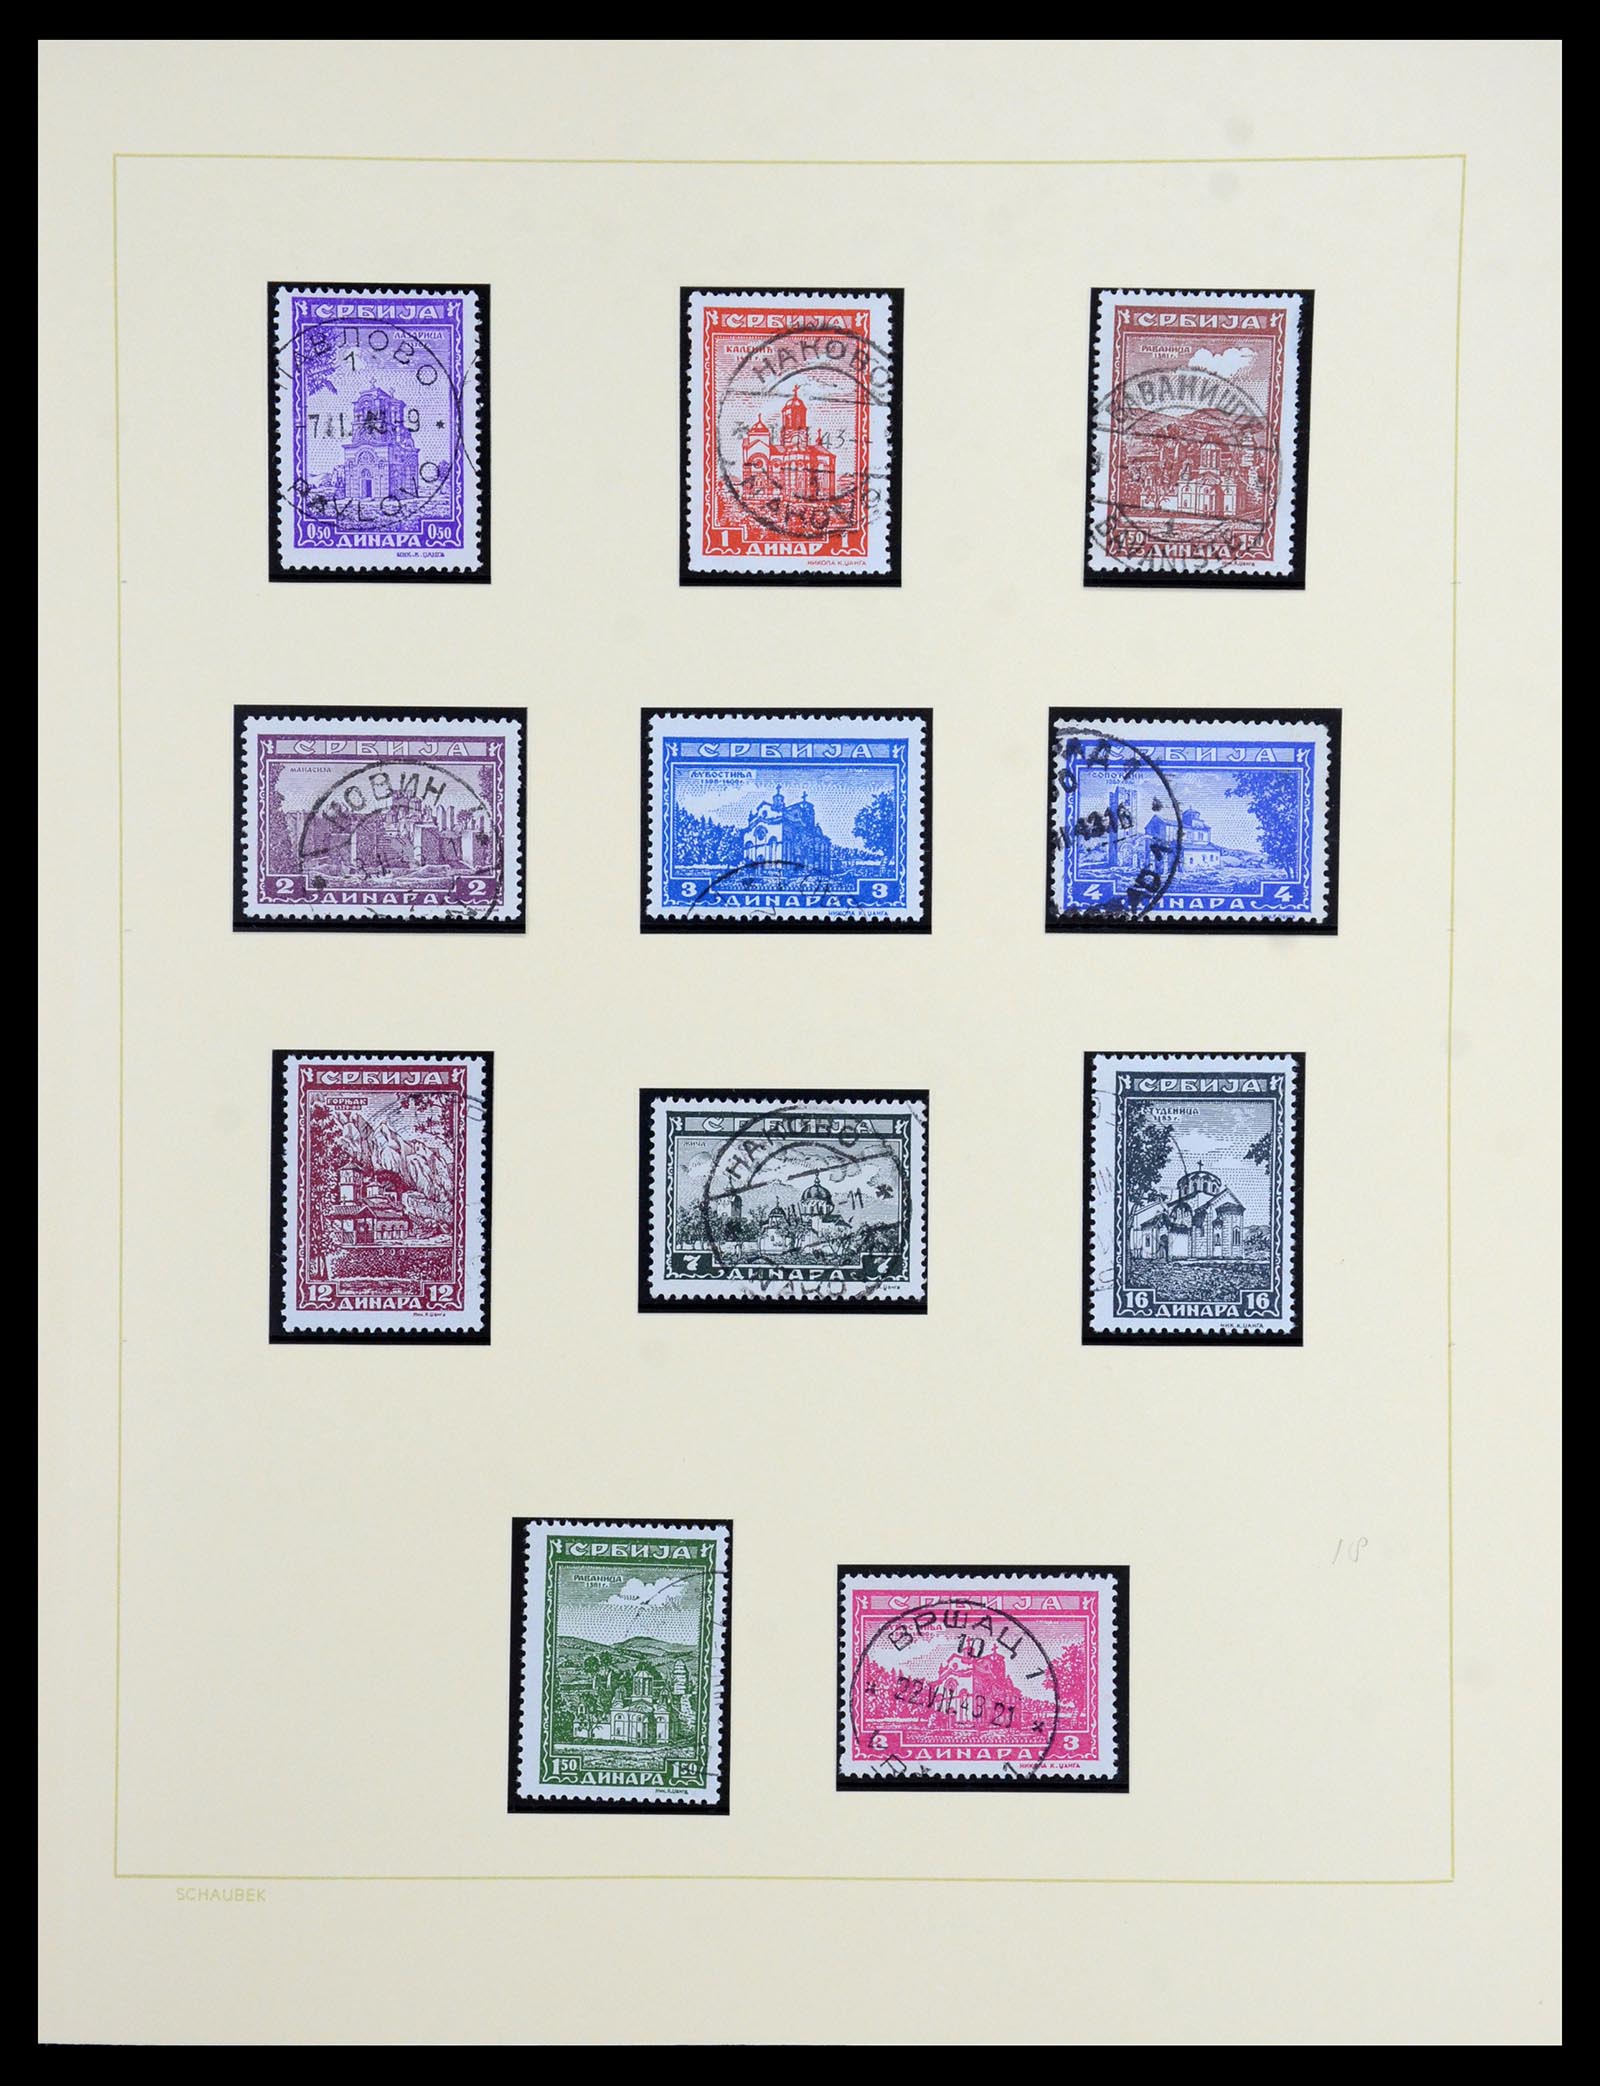 36505 008 - Stamp collection 36505 German occupation Serbia 1941-1945.